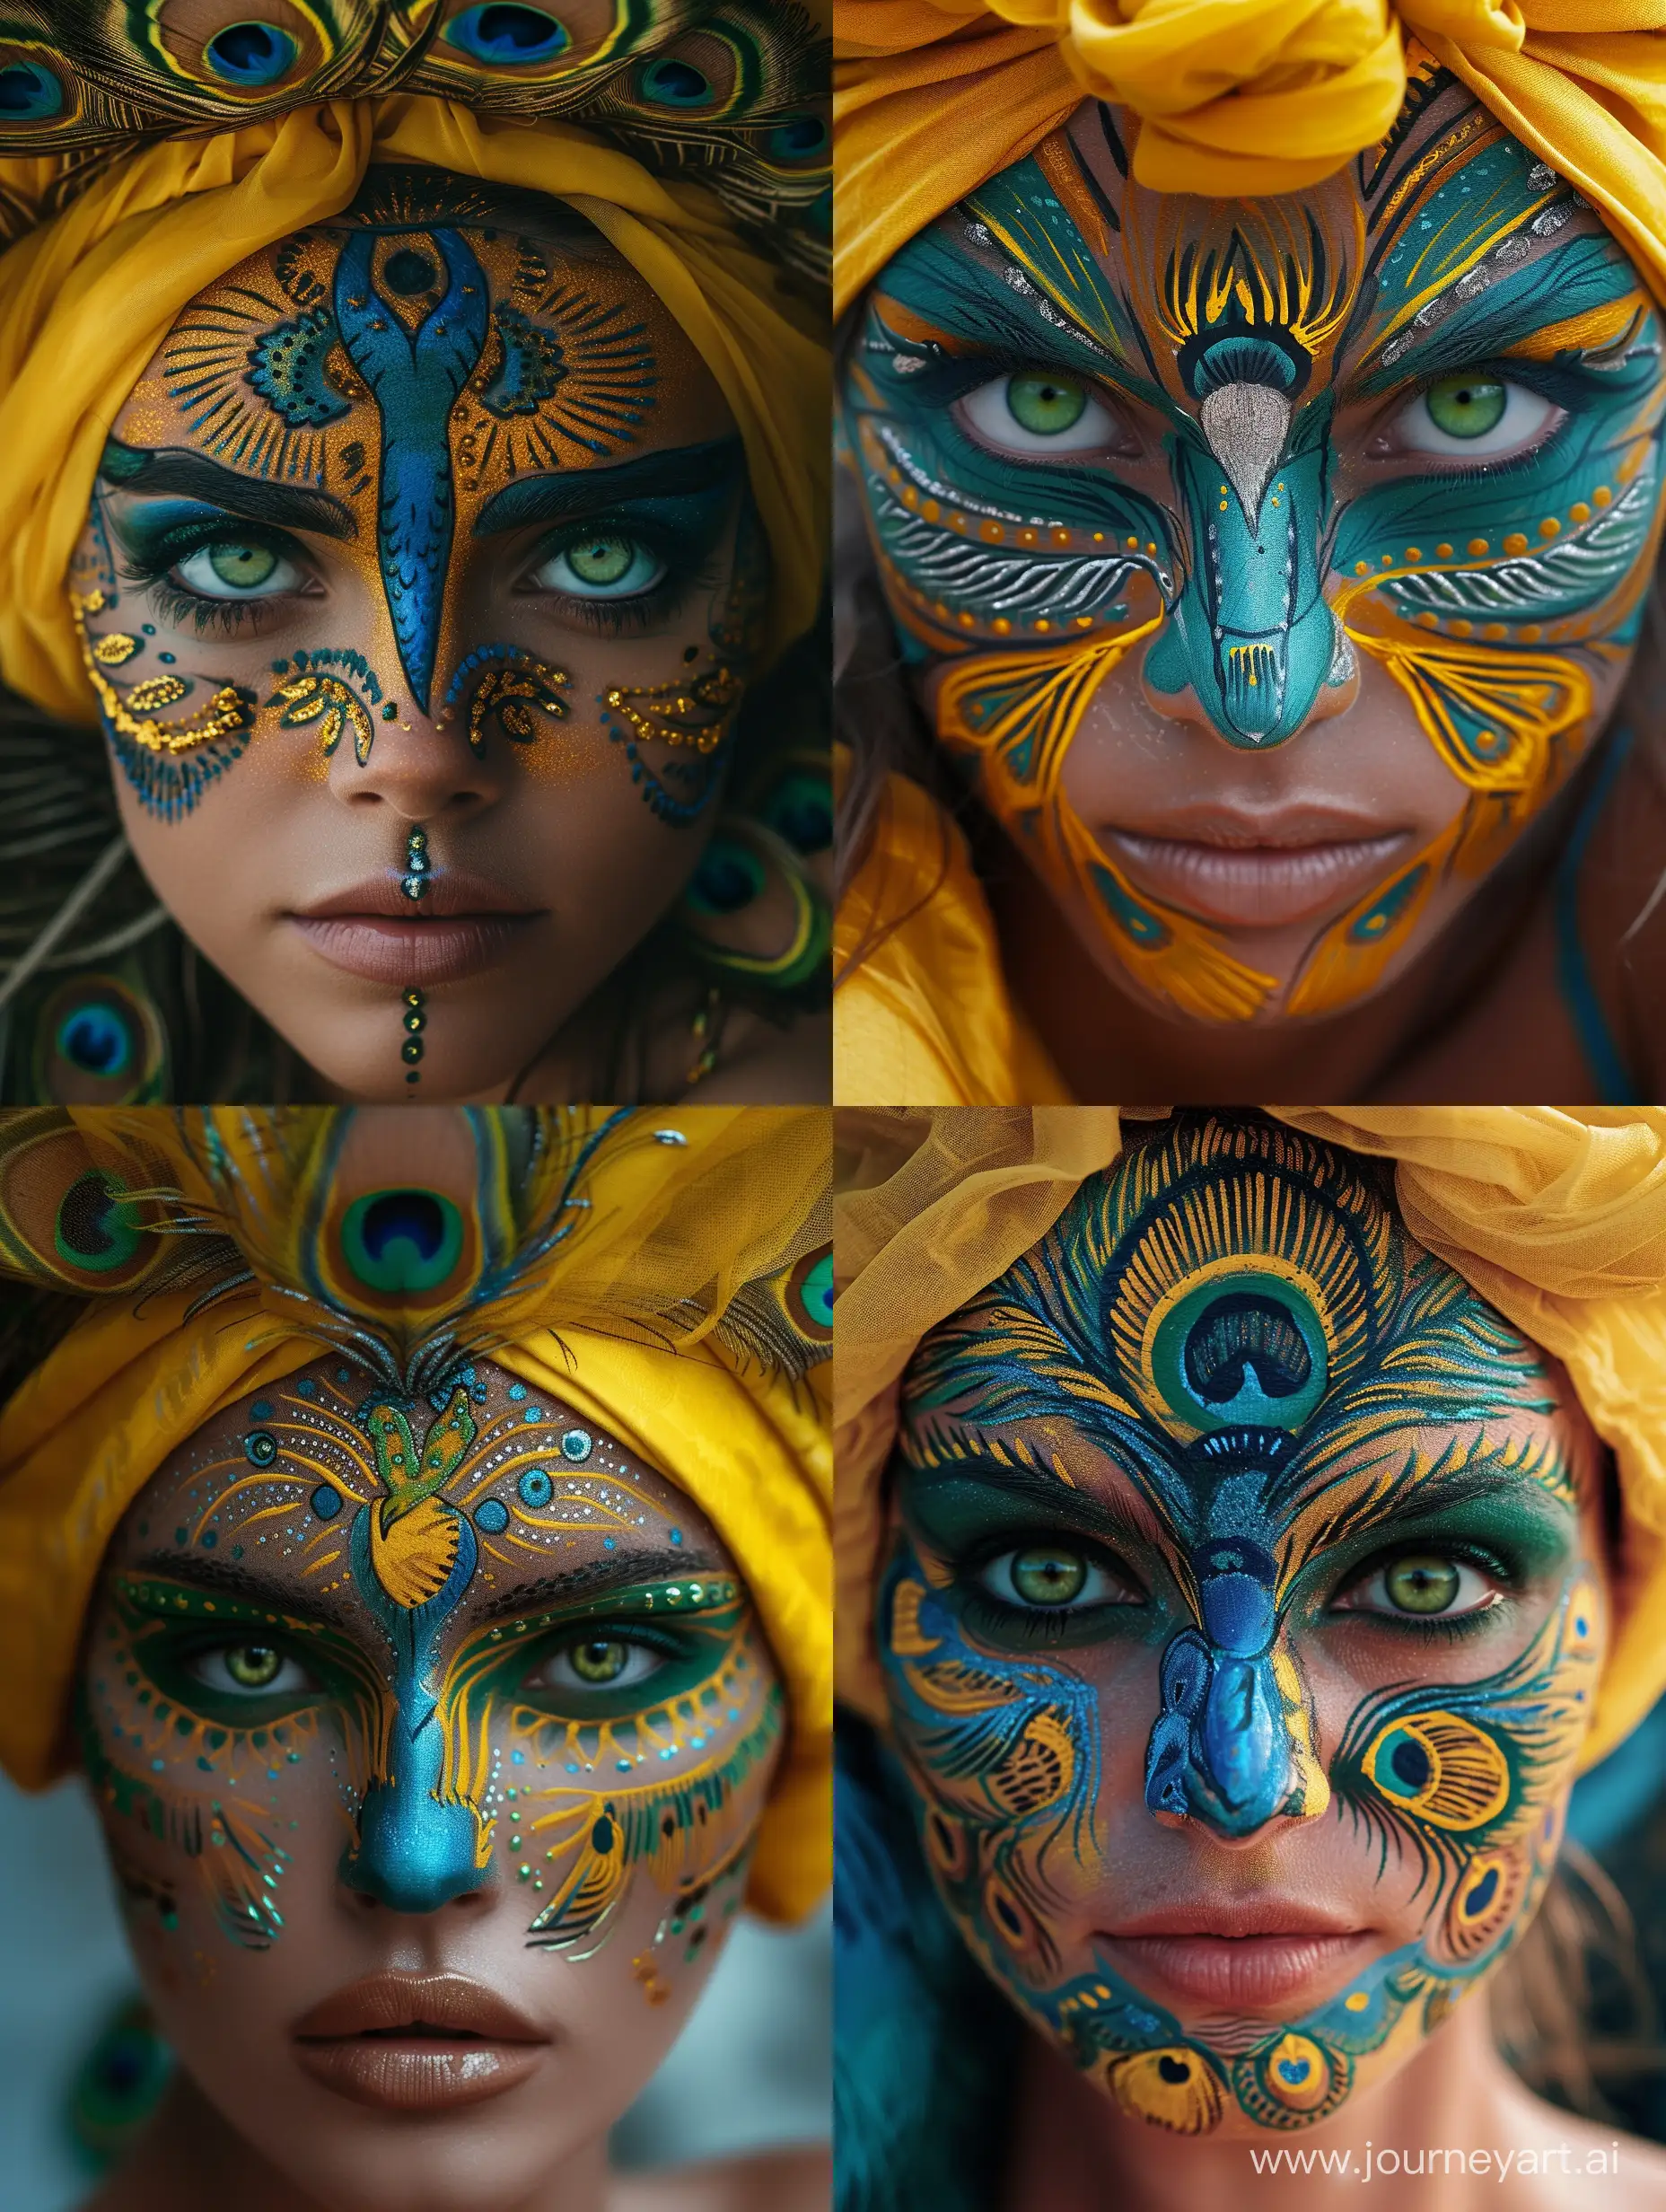 The image features a close-up of a woman's face with intricate face paint that resembles a peacock. She wears a yellow headpiece and has green eyes.